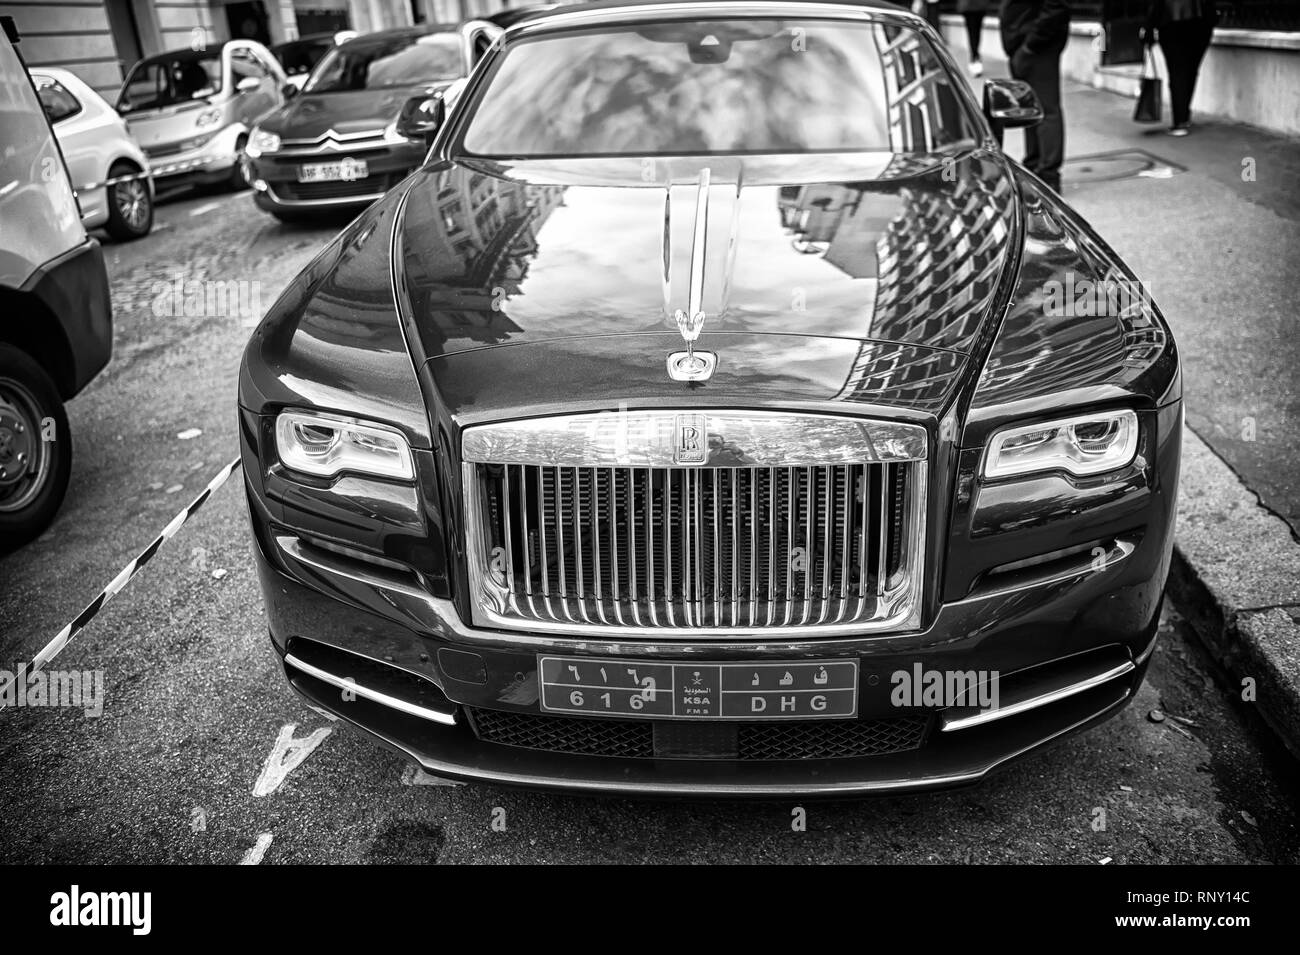 Paris, France - September 26, 23, 2017: luxury Supercar rolls royce rolls-royce ghost blue and gold color parked on the street in Paris. rolls royce rolls-royce is famous expensive automobile brand car Stock Photo